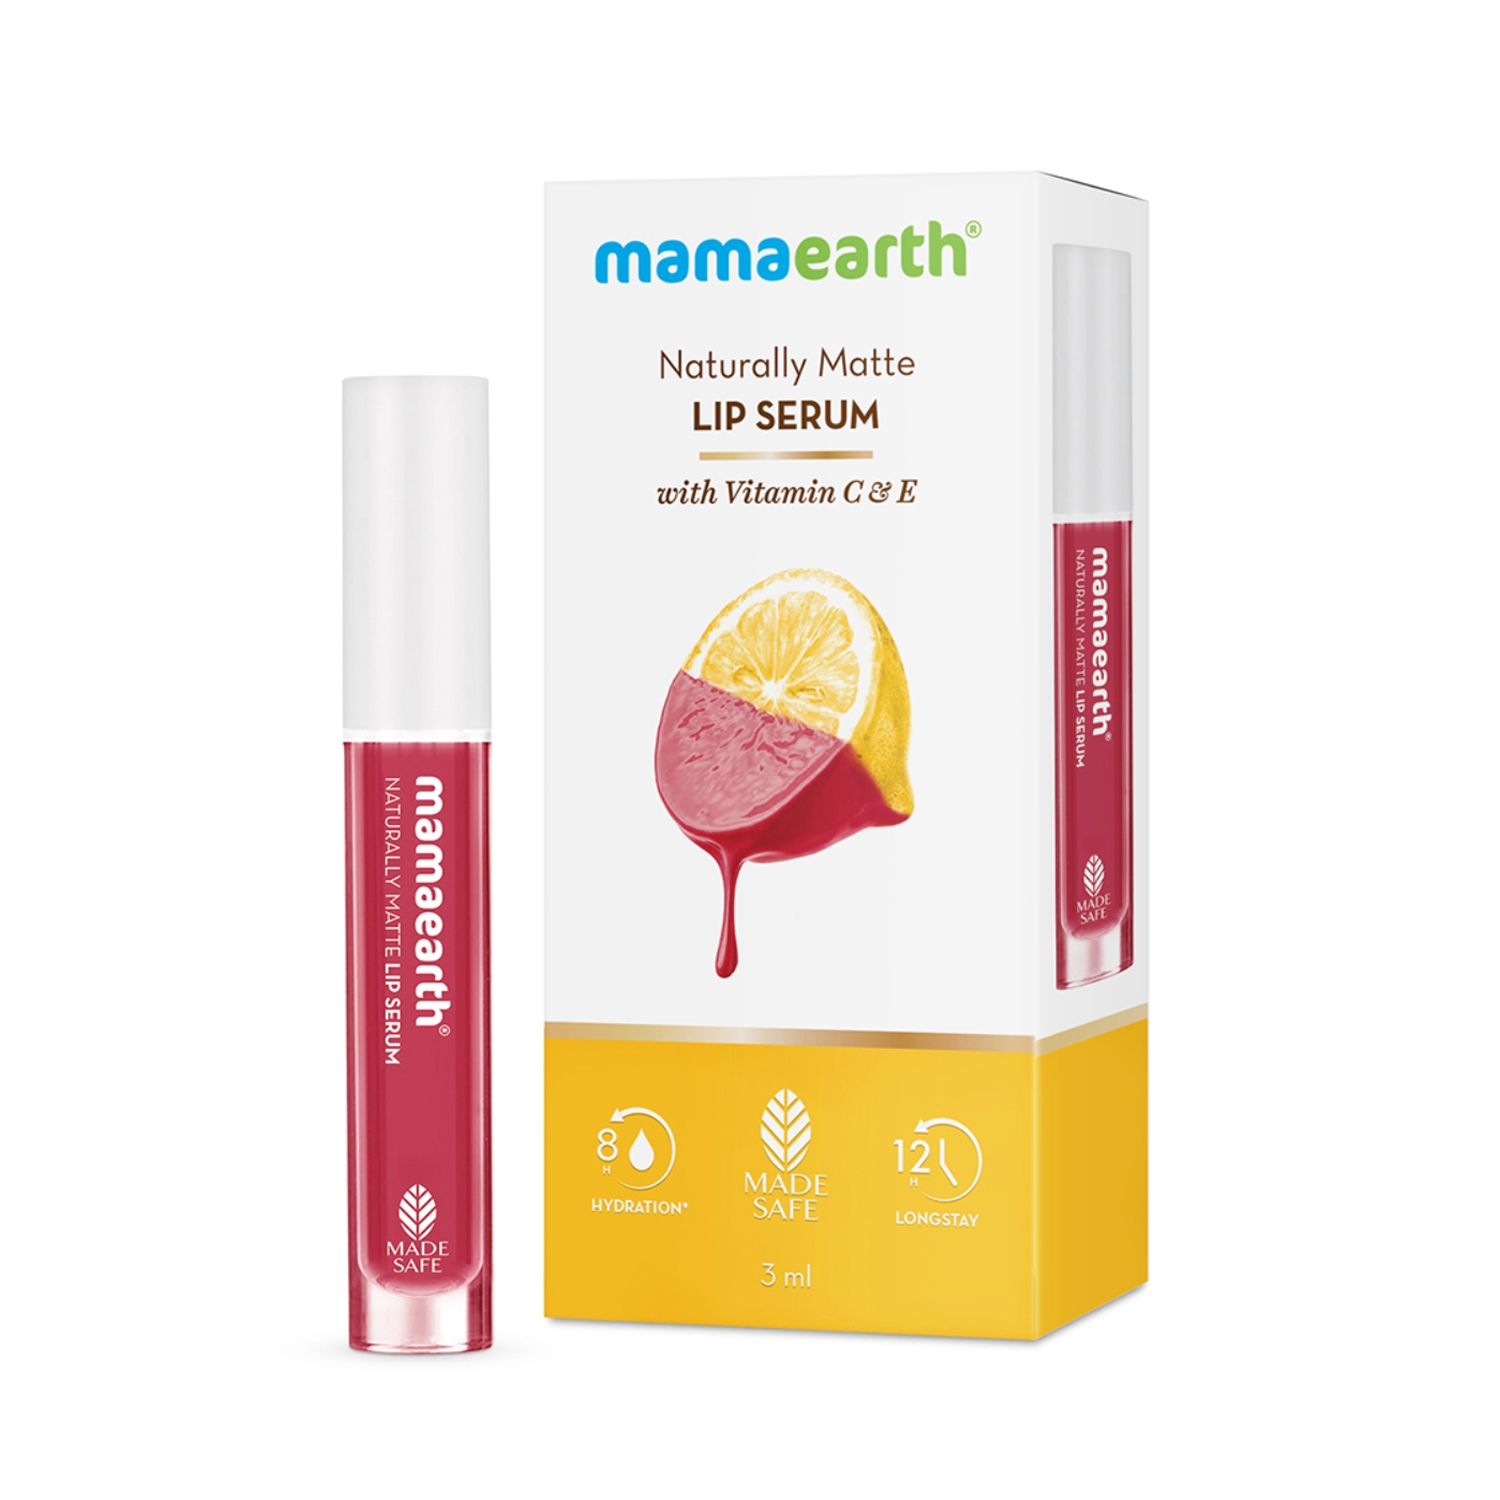 Mamaearth Naturally Matte Lip Serum With Vitamin C & E - Candylicious Nude (3ml)